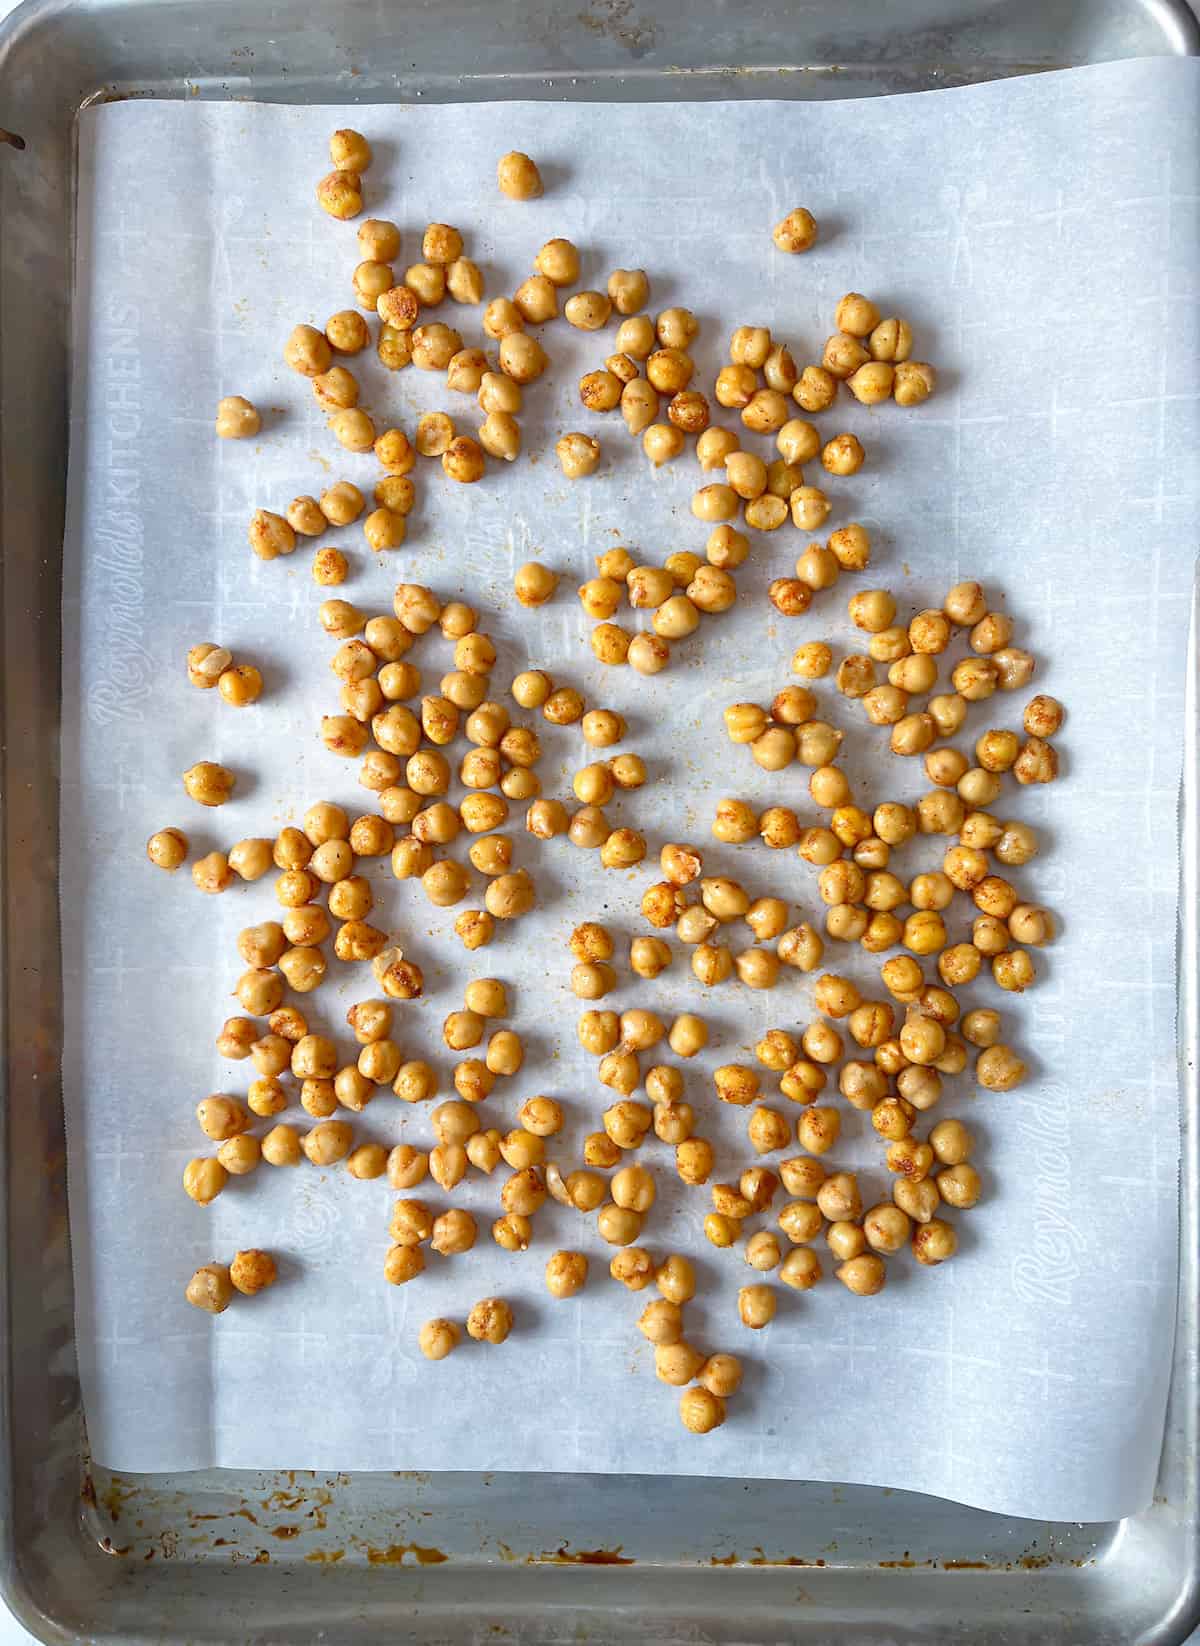 Chickpeas in a single layer on a large baking sheet lined with parchment paper